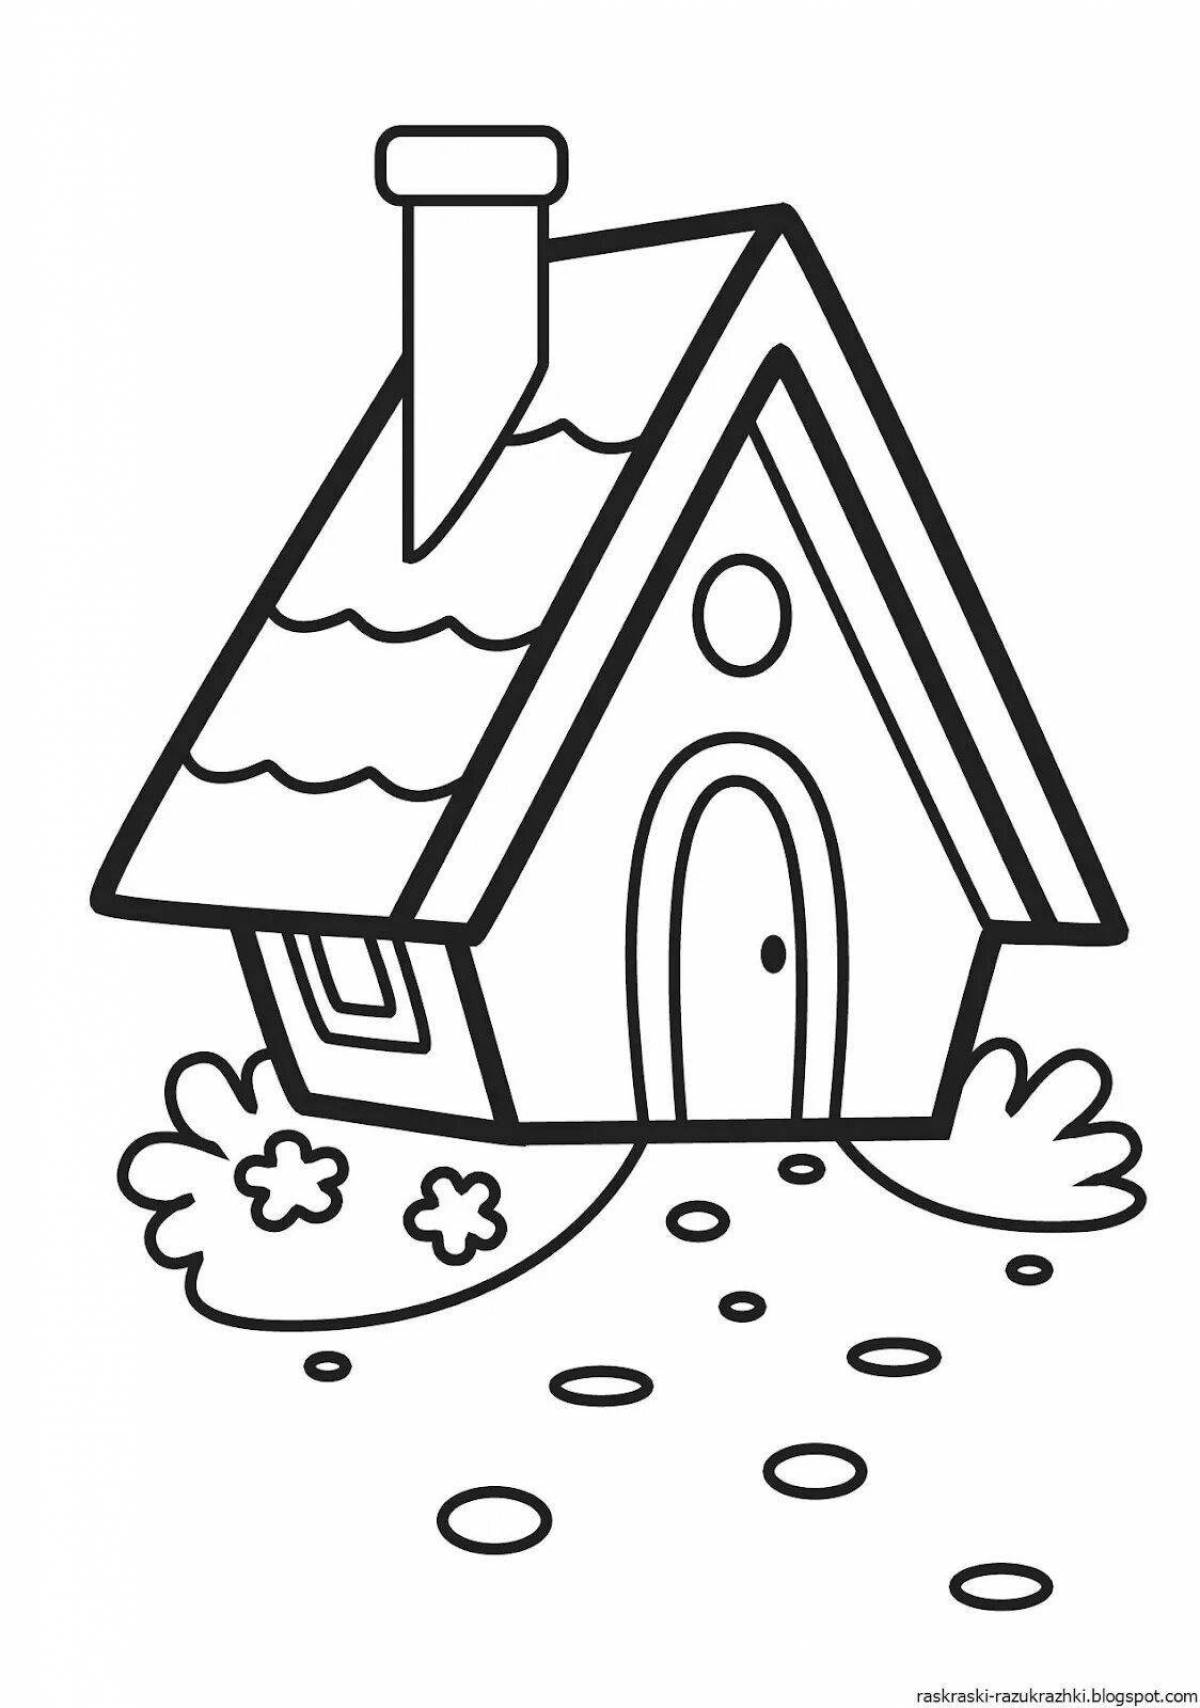 Playful simple house coloring page for kids